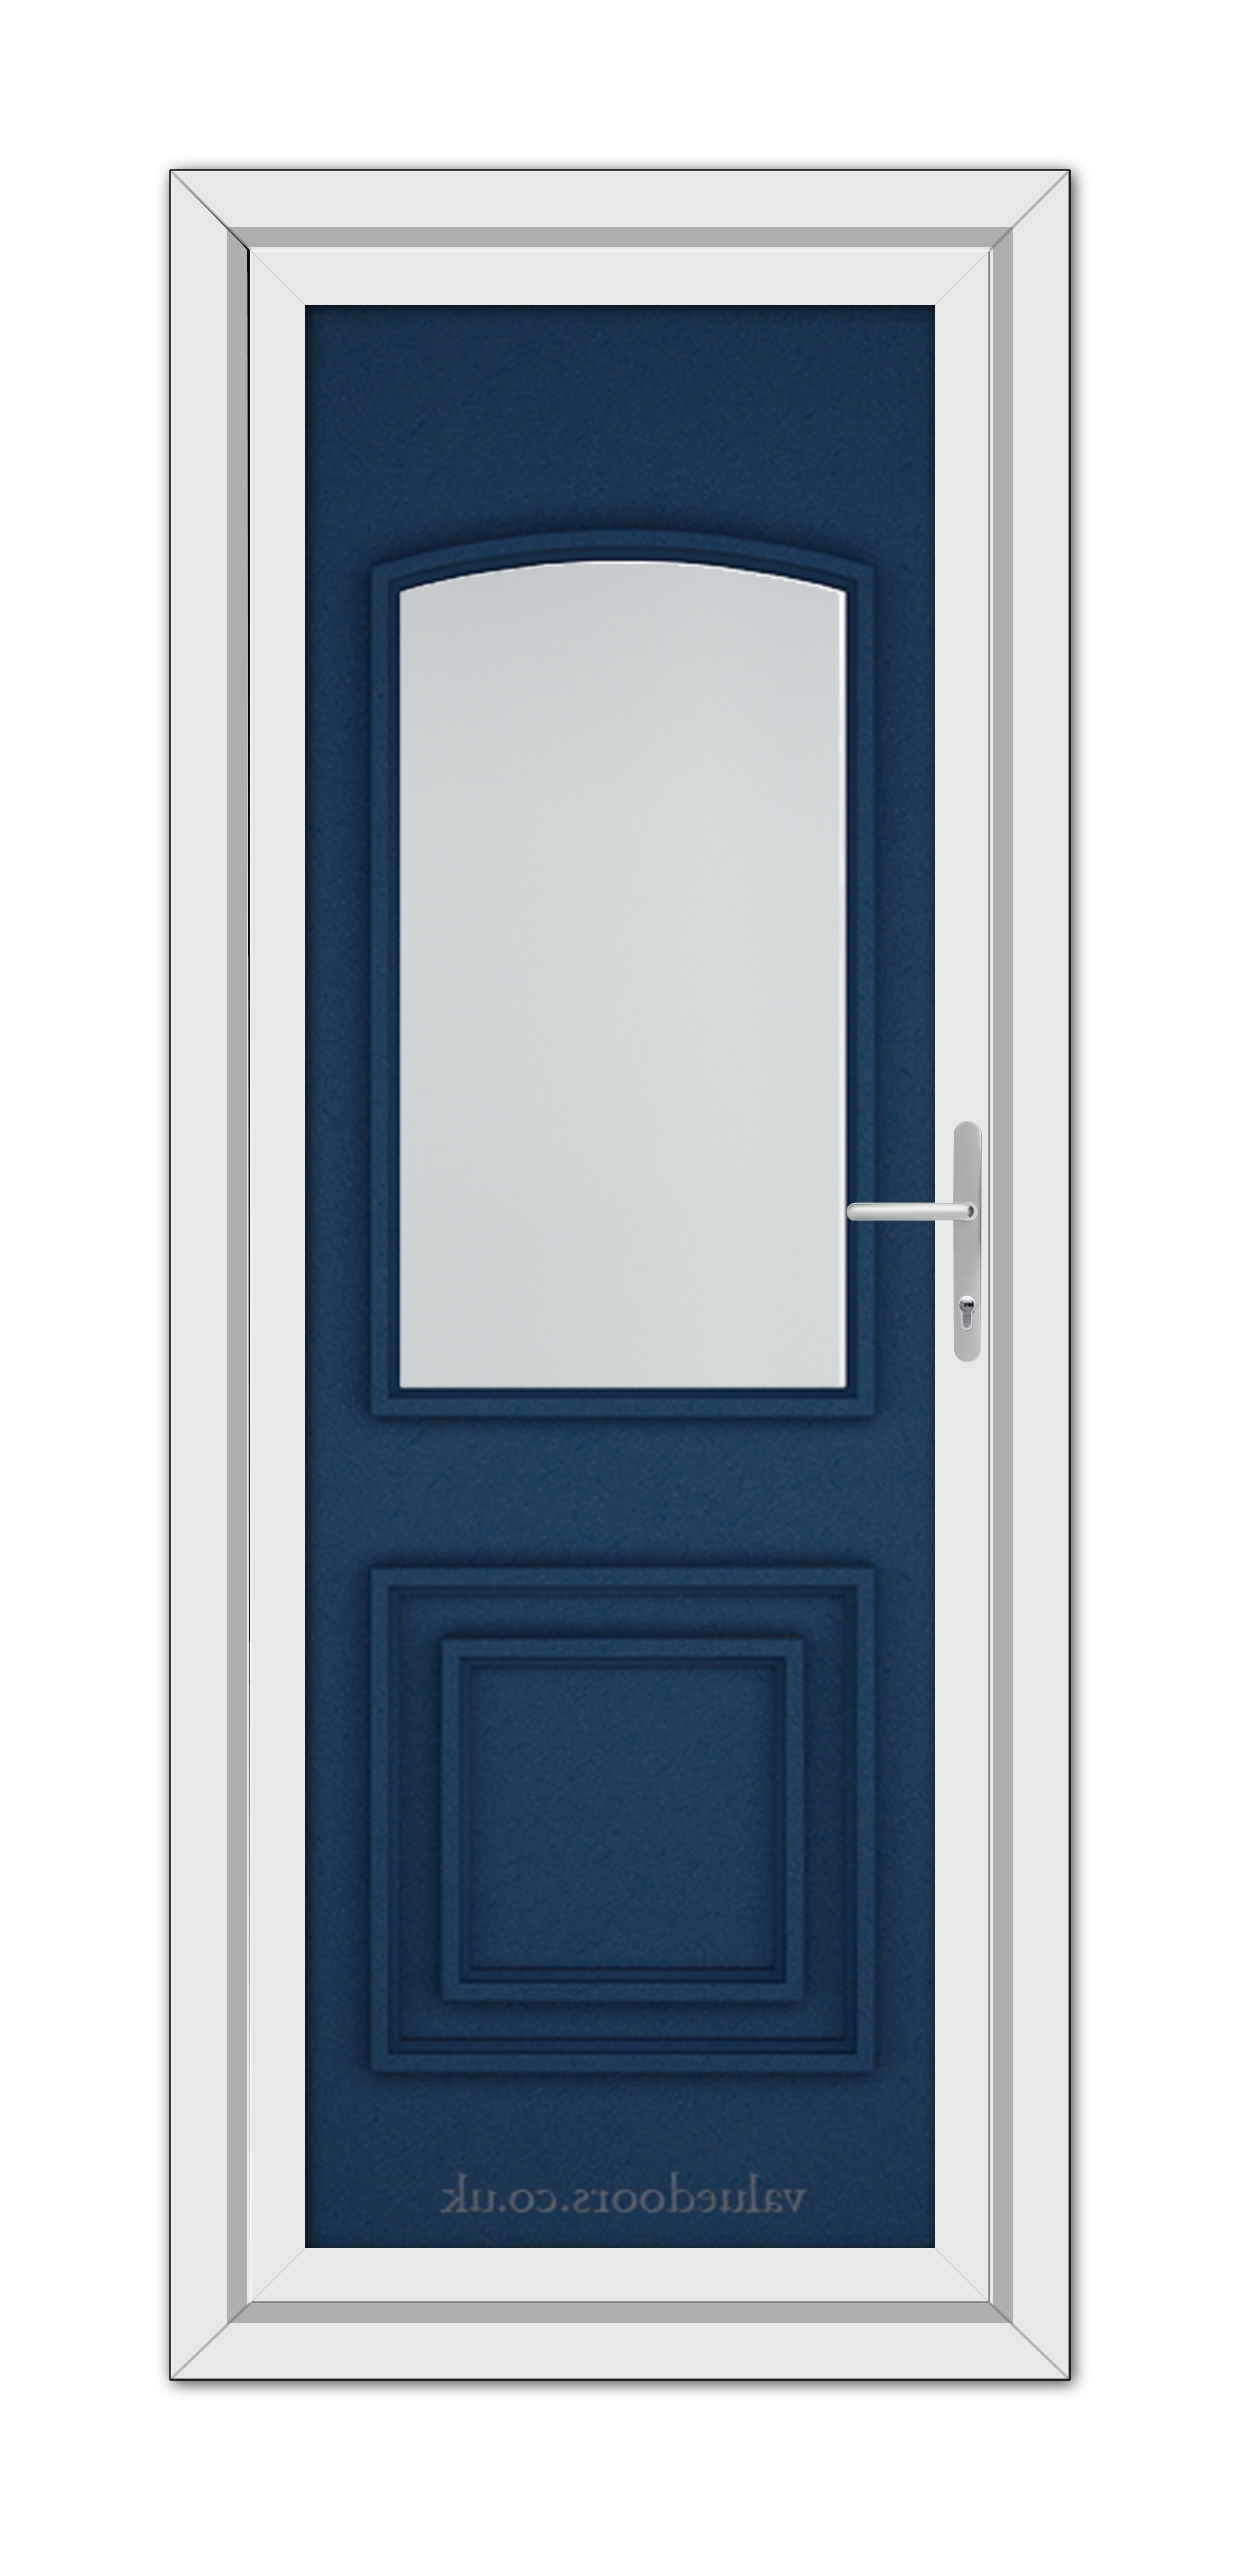 A vertical image of a closed Blue Balmoral Classic uPVC Door with a white frame and dark blue panels, featuring a rectangular window and a silver handle.